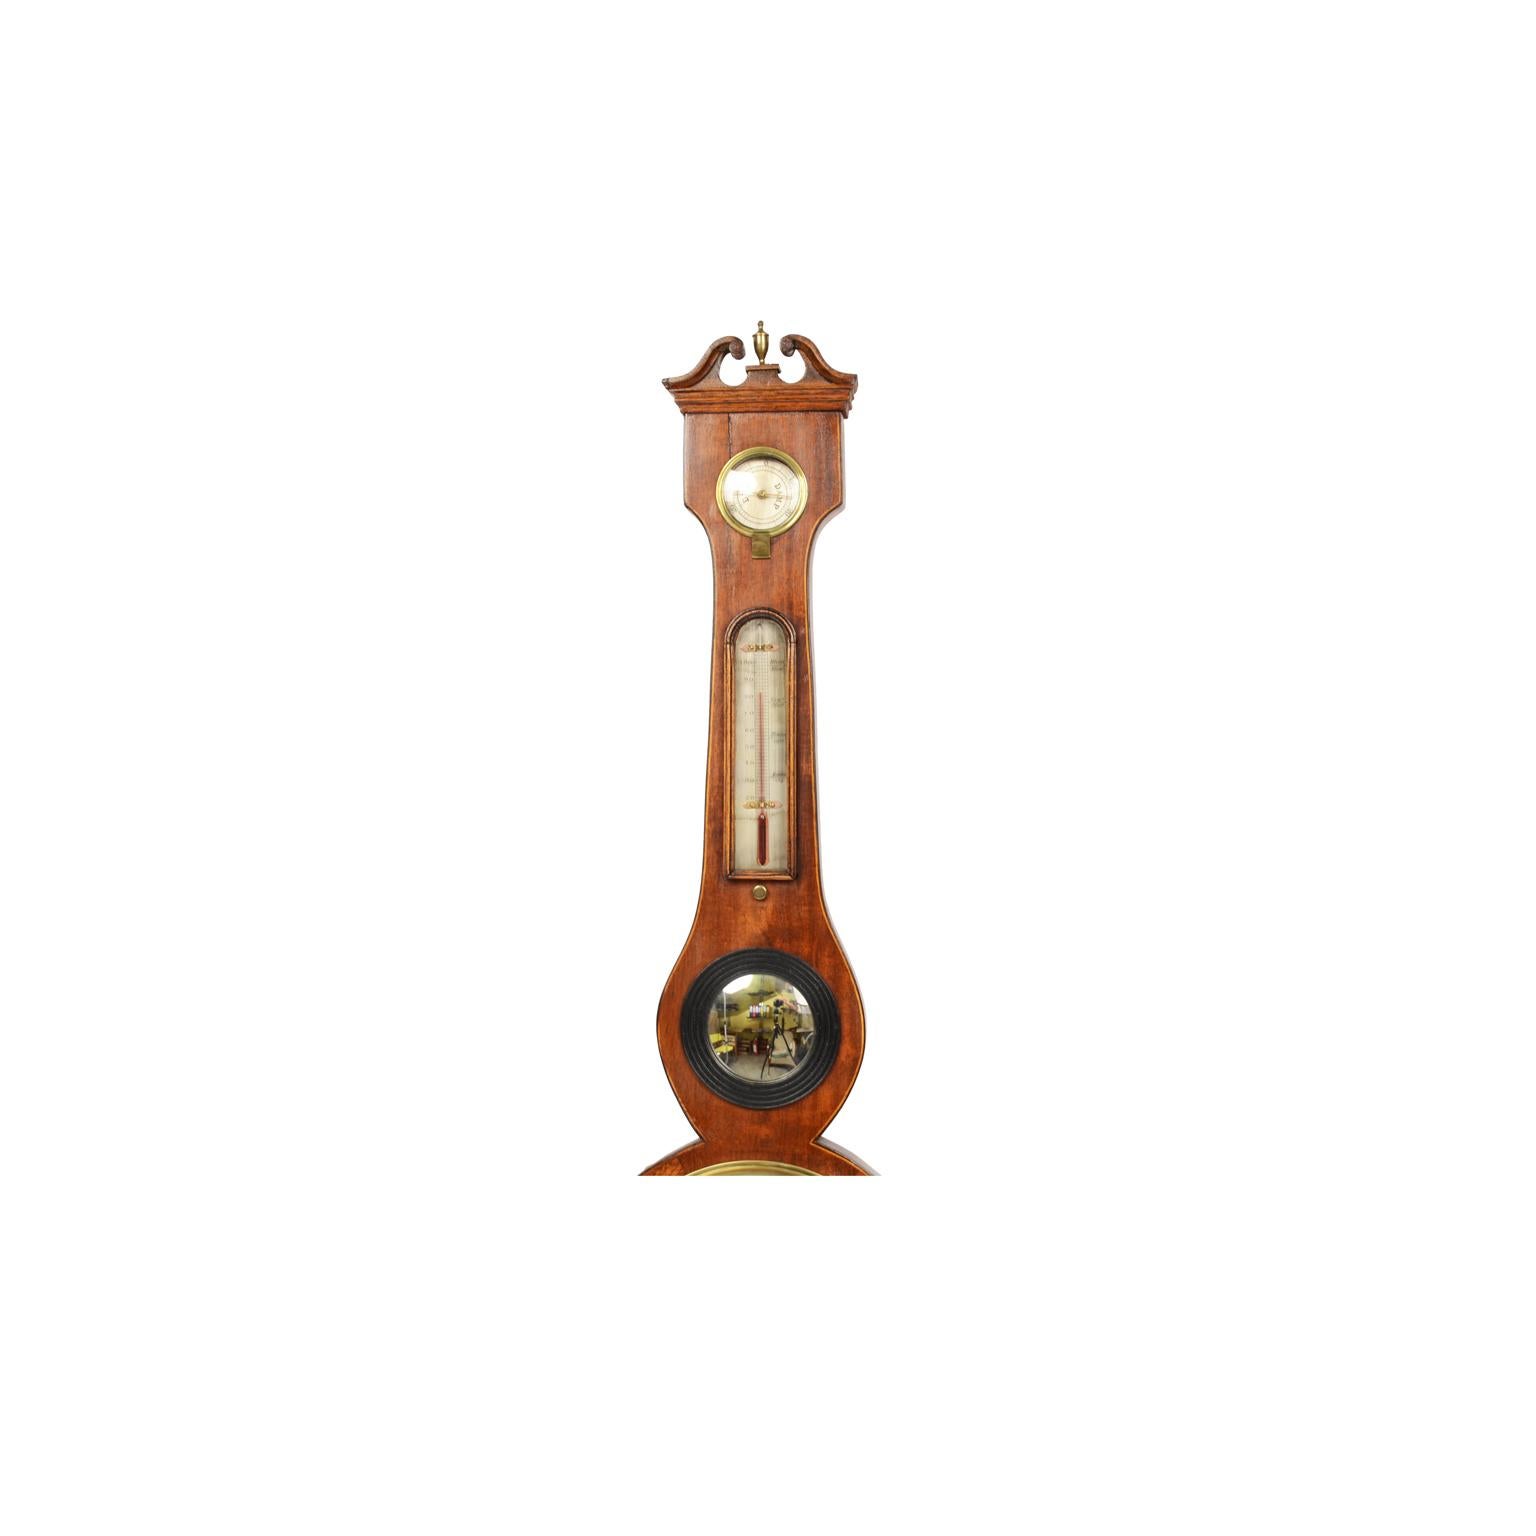 Torricelli barometer, mahogany, with thermometer and hygrometer, including a level for the right position, signed A. Intross Strood, first half of the 19th century. Measures: Height cm 98, inches 39. Very good condition.